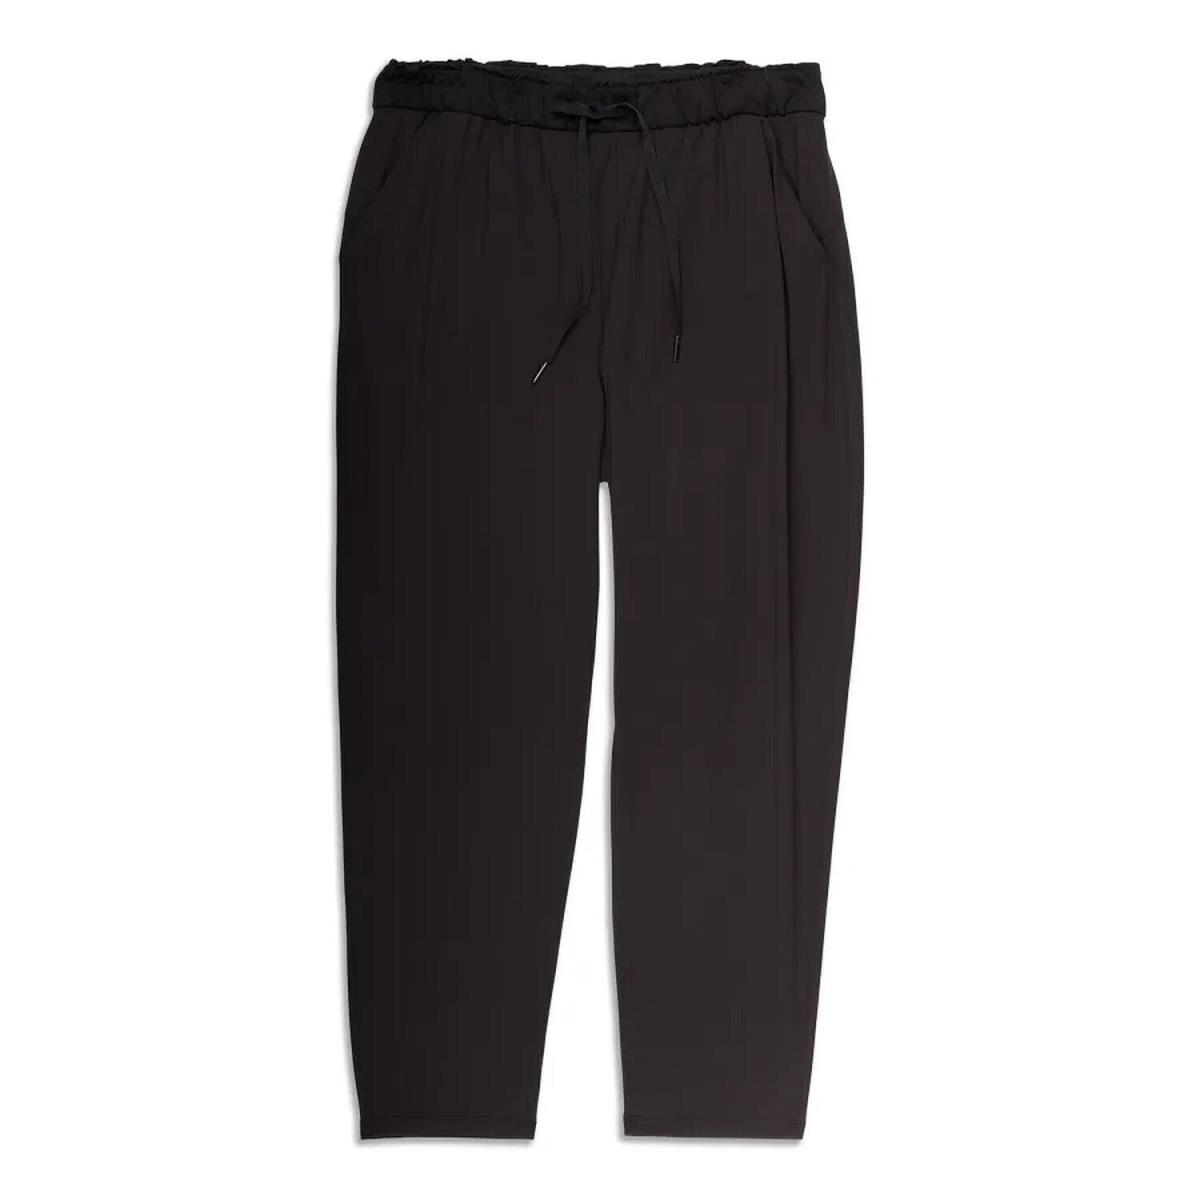 Lululemon Womens Pant Keep Moving High Rise Luxtreme Black Size 8 LW5CRBS Jogger